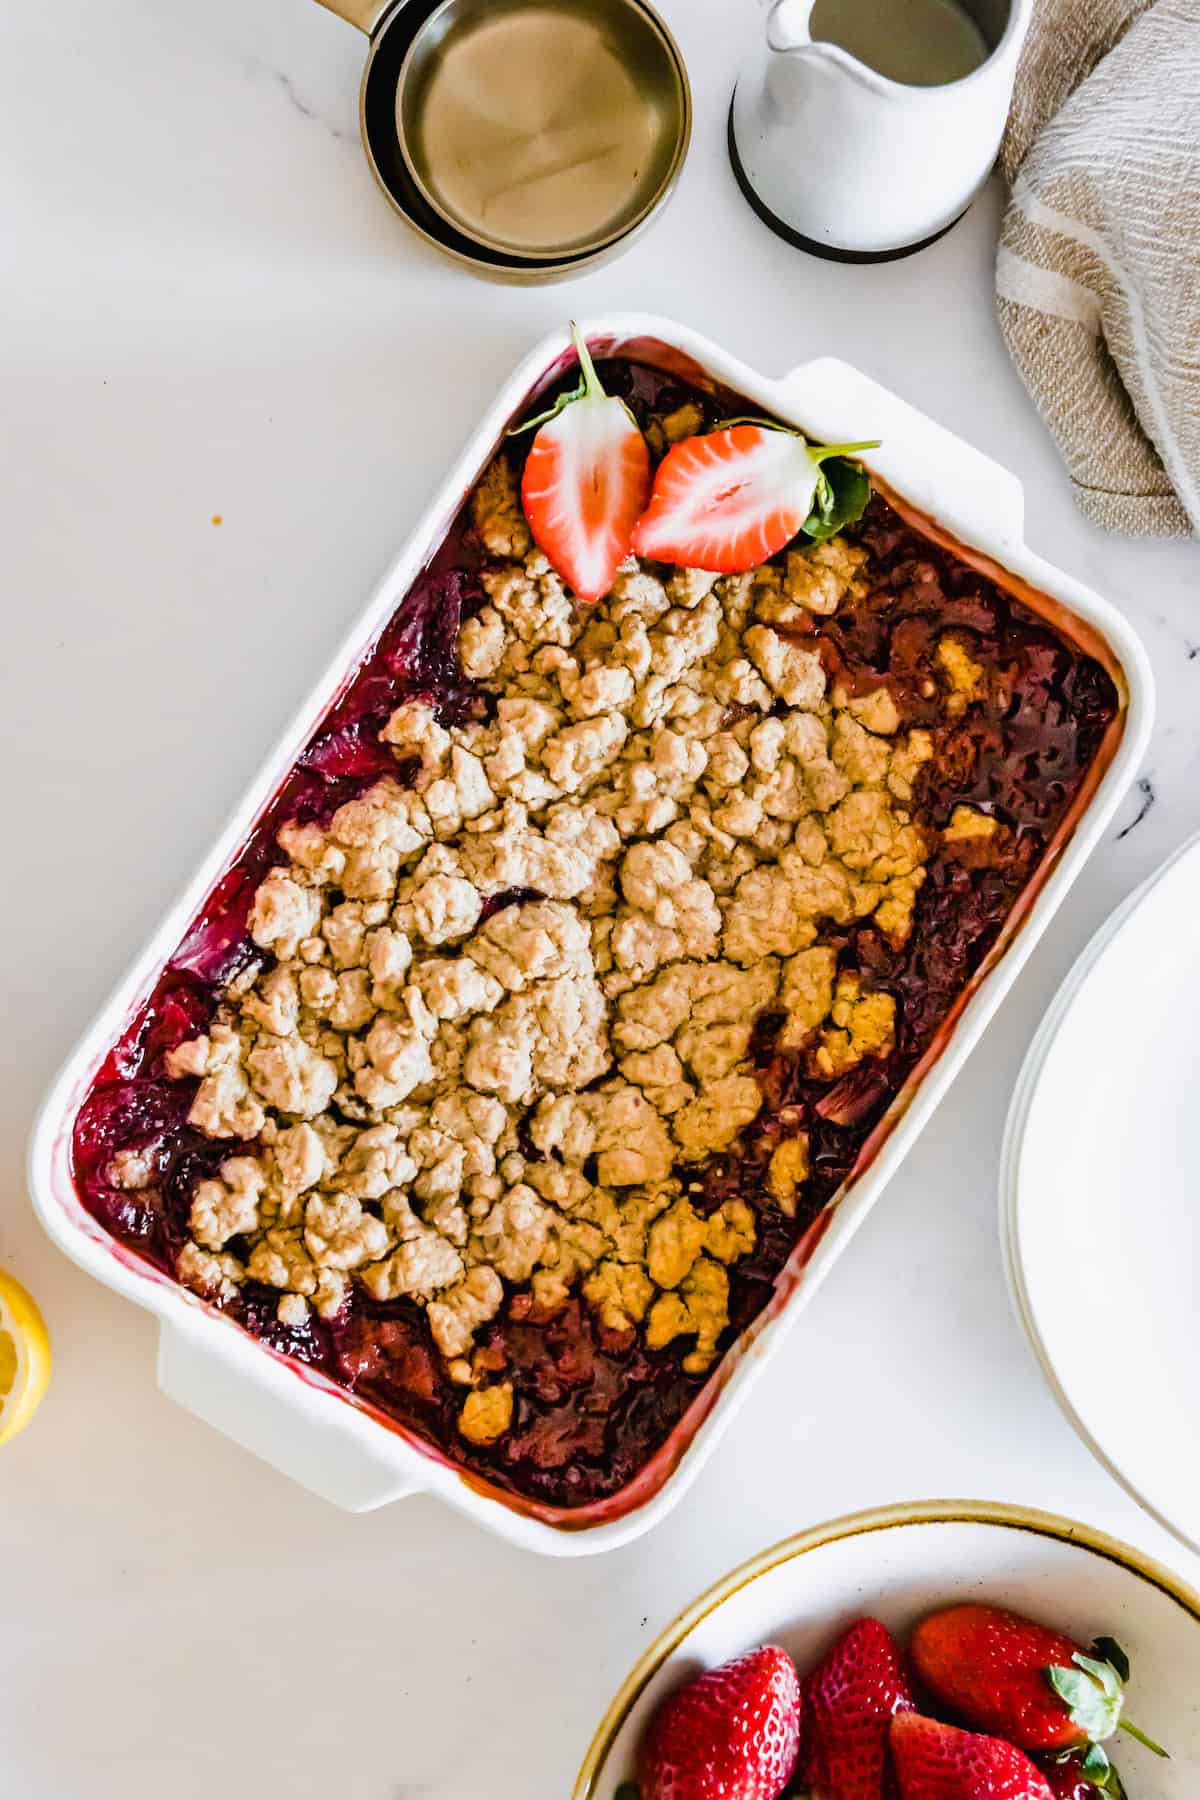 A Strawberry Crumble in a Pan with Two Sliced Strawberries on Top